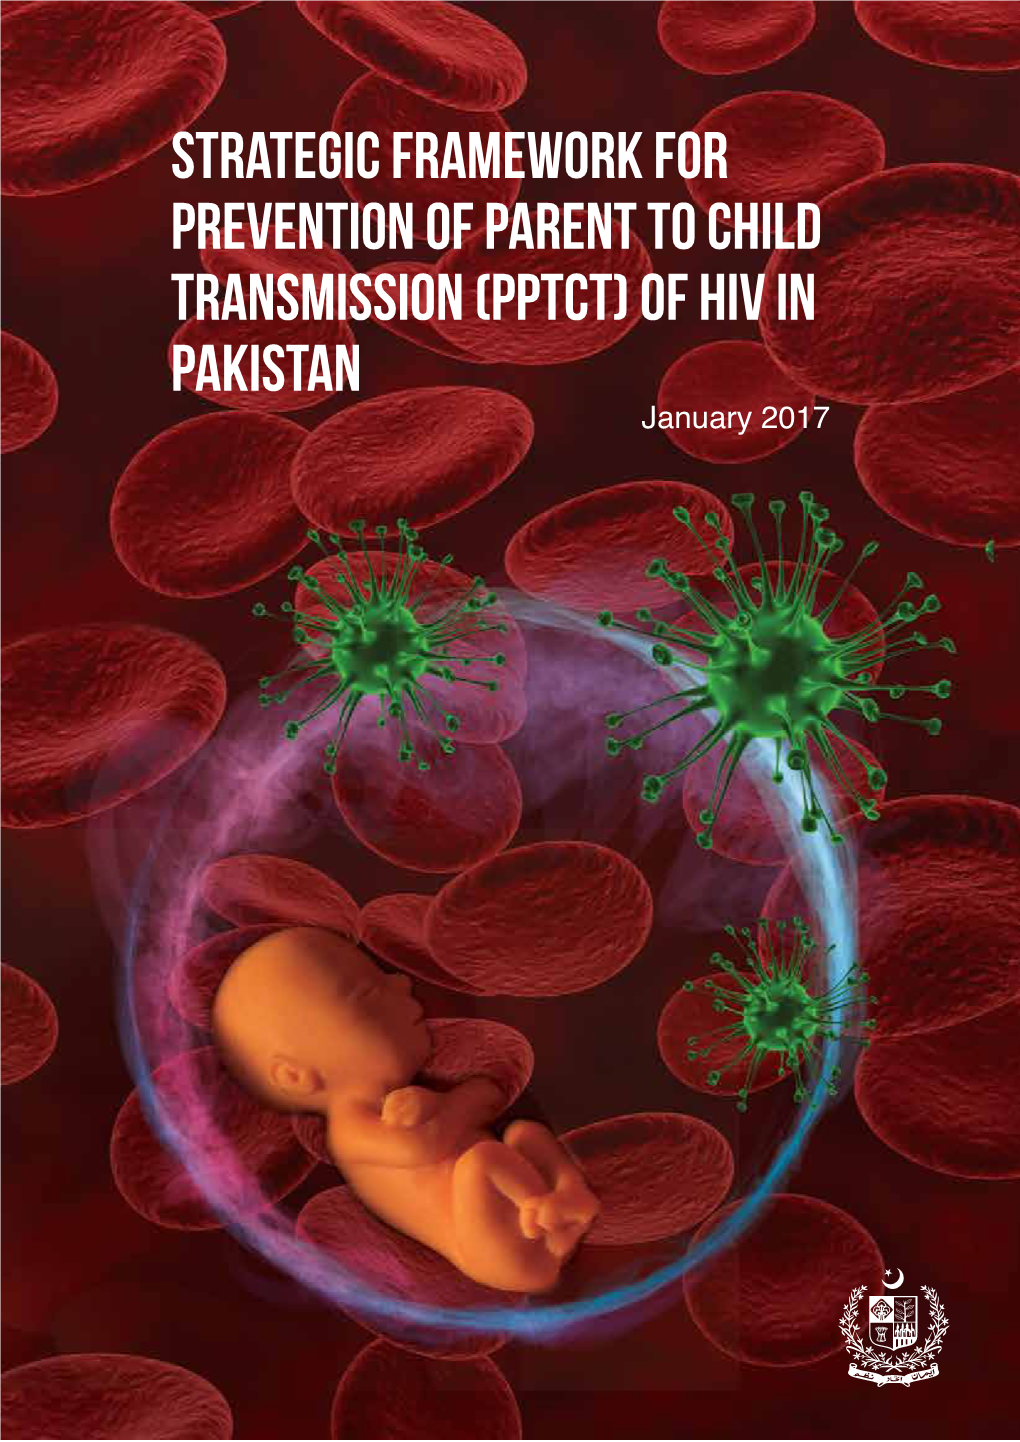 Strategic Framework for Prevention of Parent to Child Transmission (PPTCT) of HIV in Pakistan January 2017